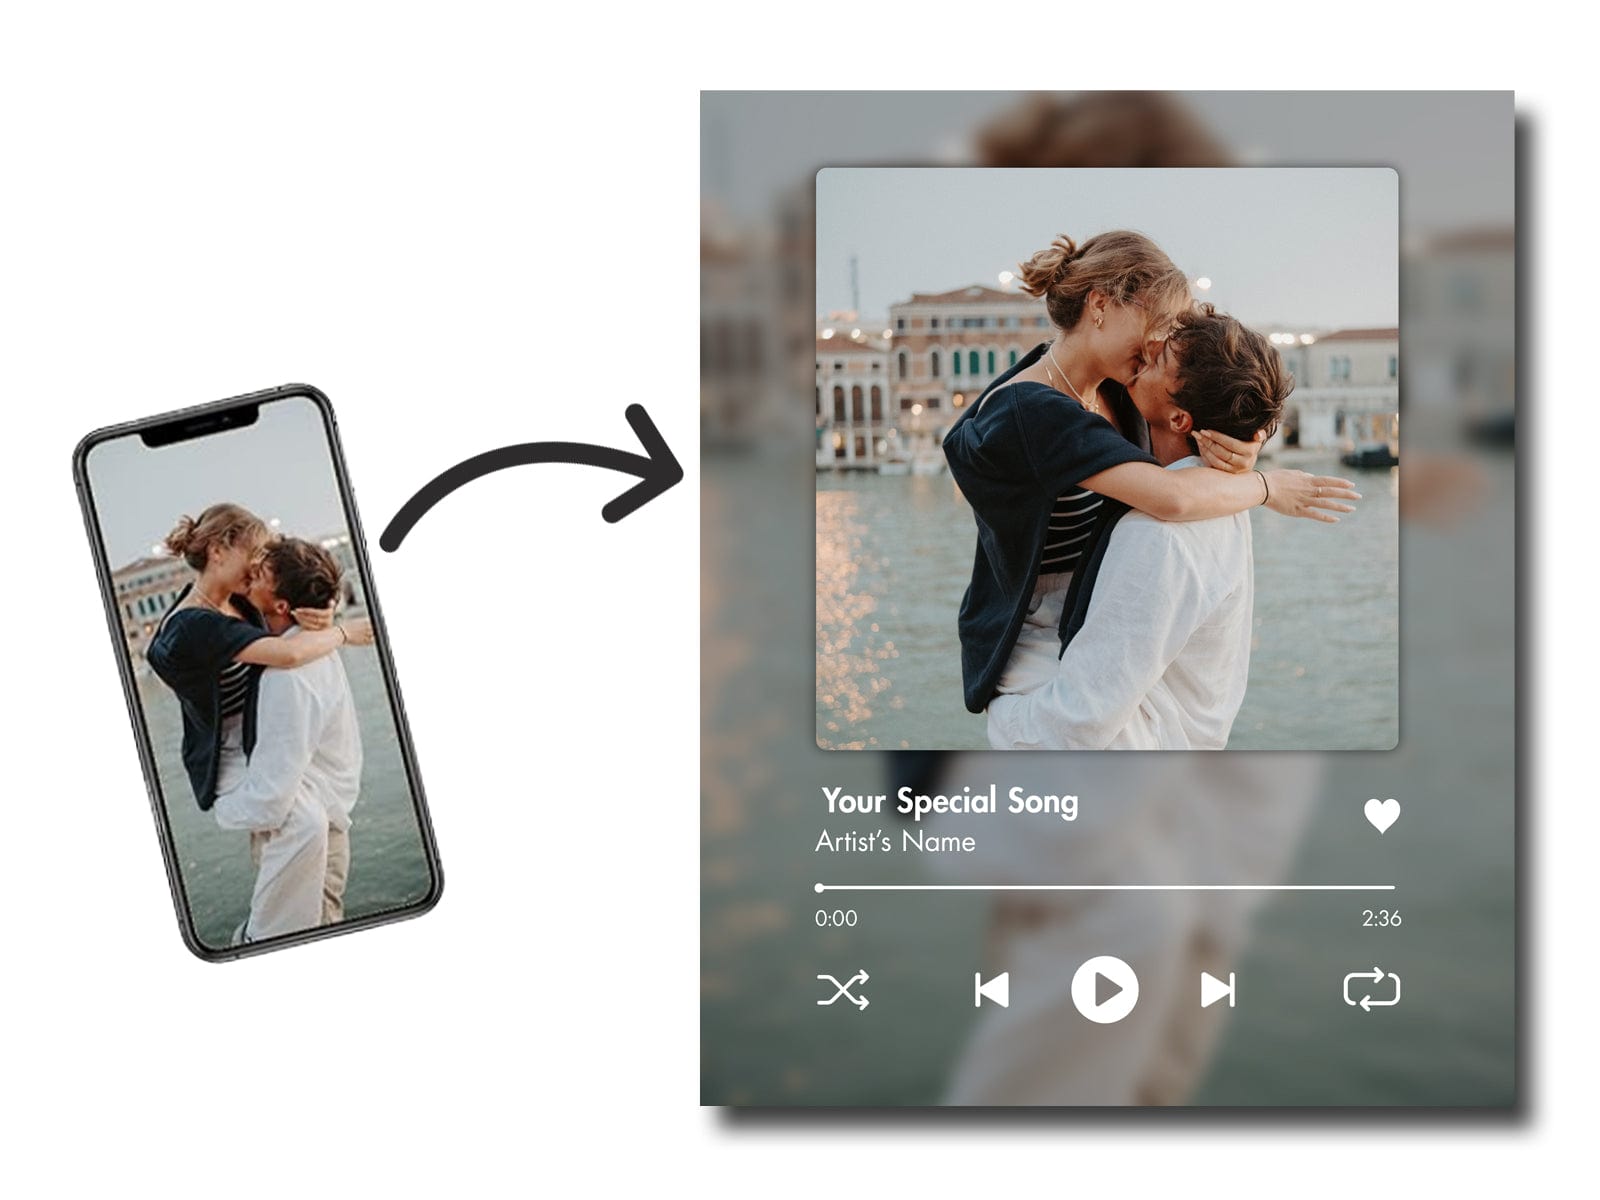 Easy to customize your photo and special song, you can even do it from your phone!